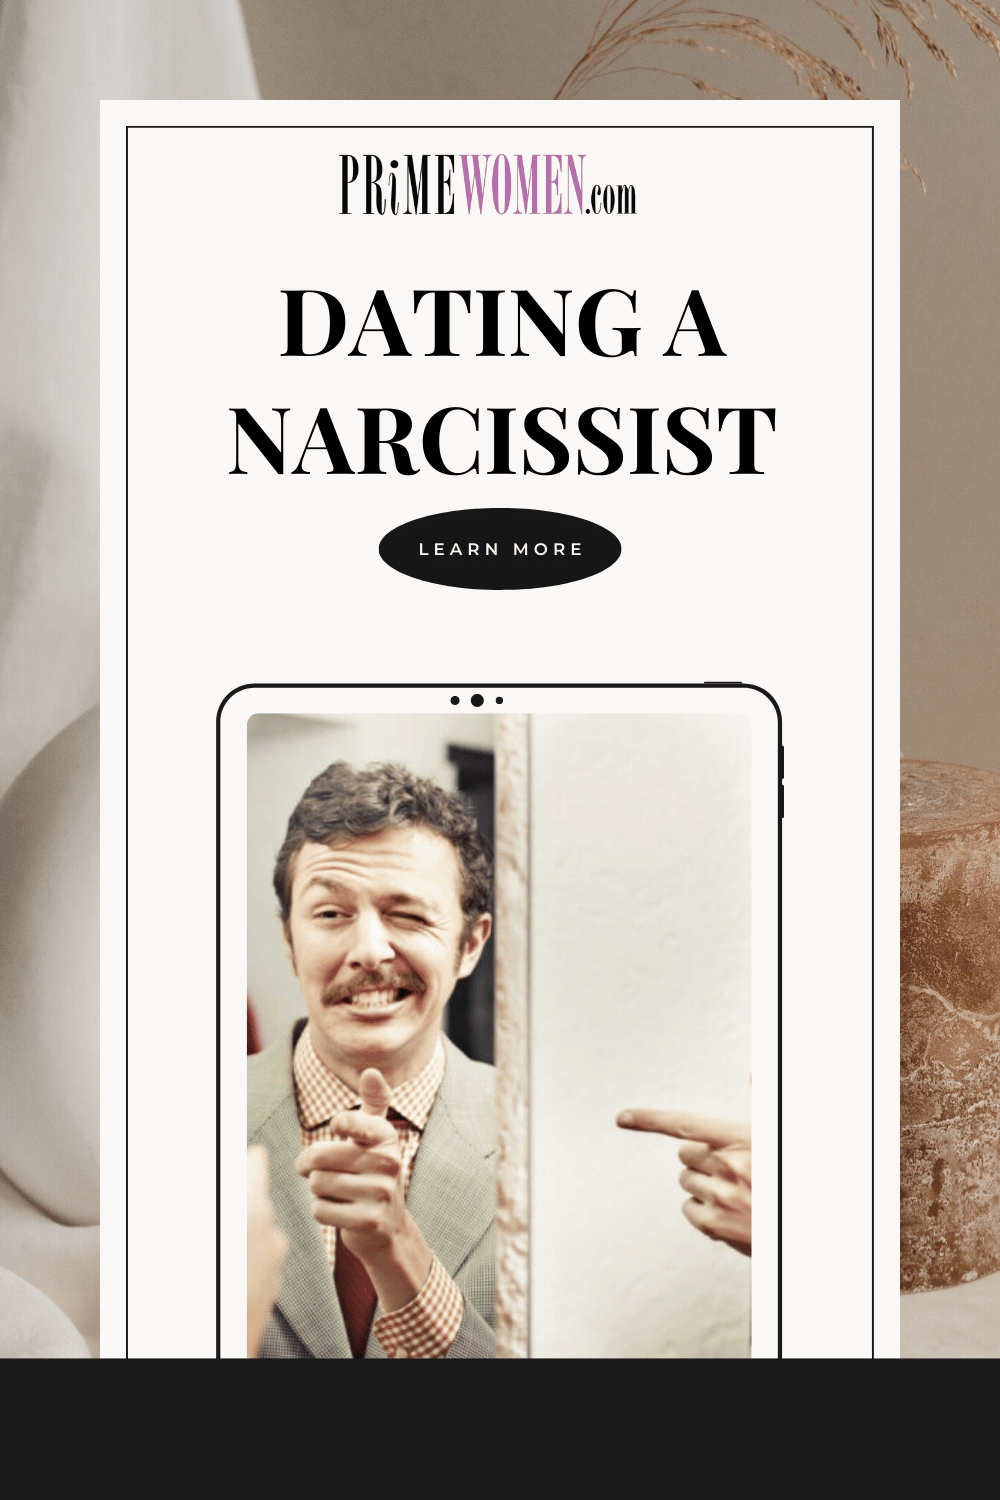 How to tell if you are dating a narcissist